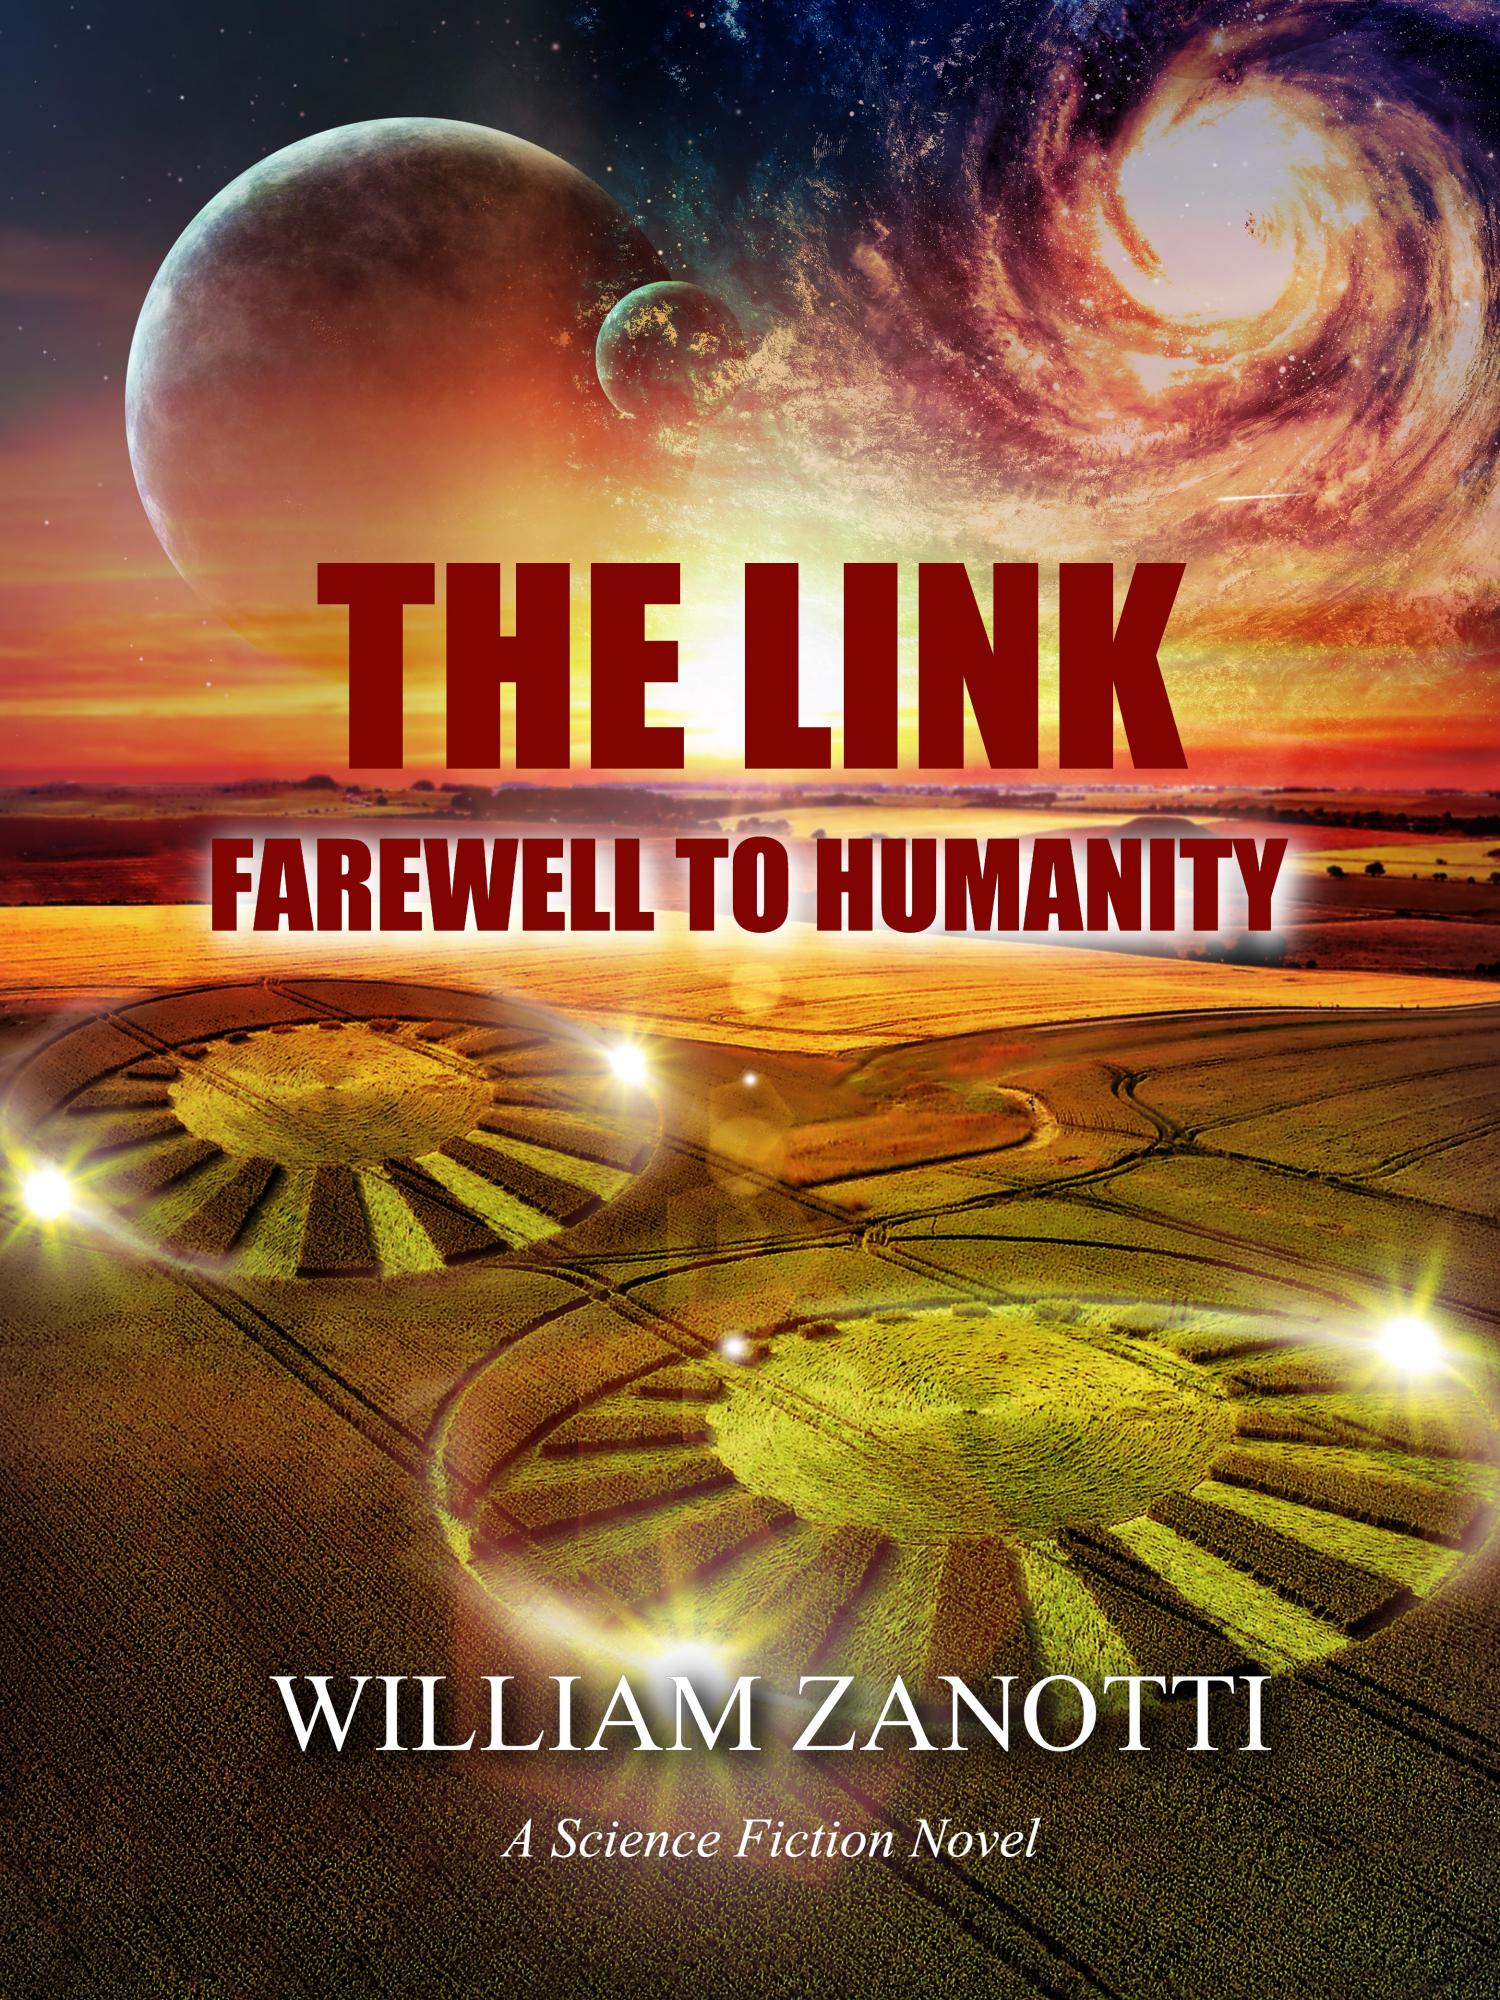 The Link: Farewell to Humanity. Link to Amazon.